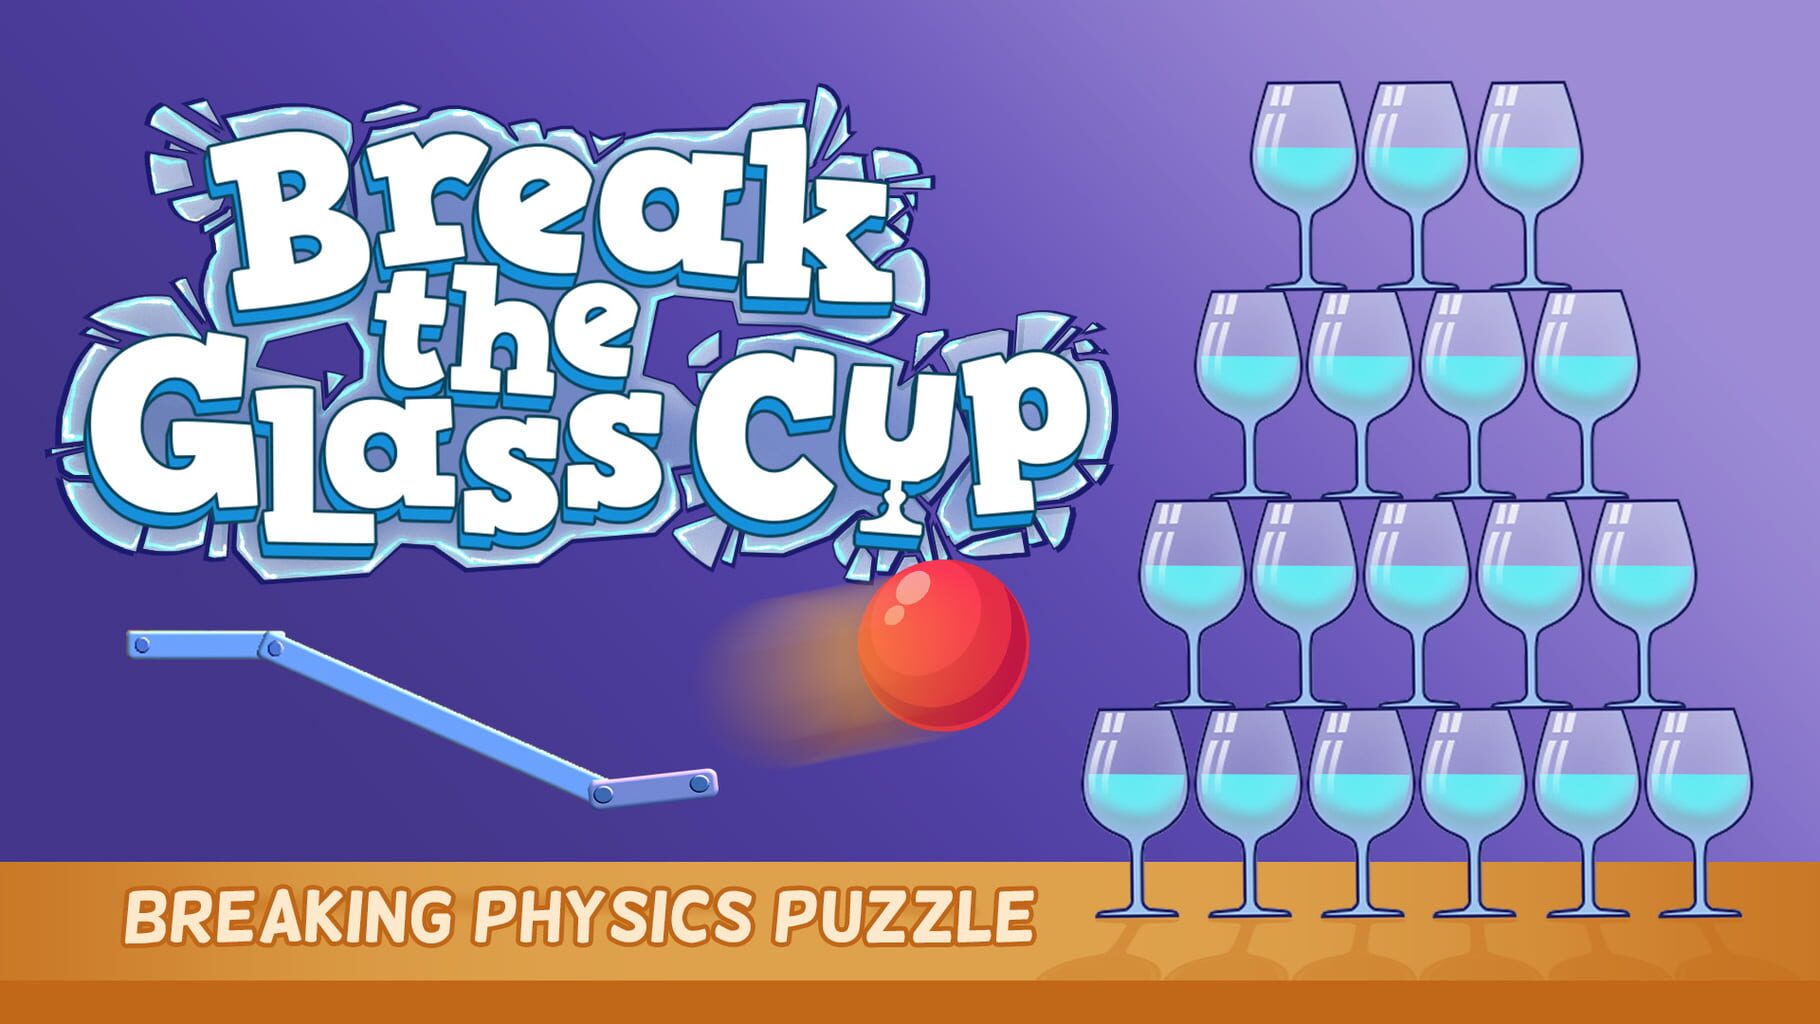 Break the Glass Cup: Breaking Physics Puzzle artwork